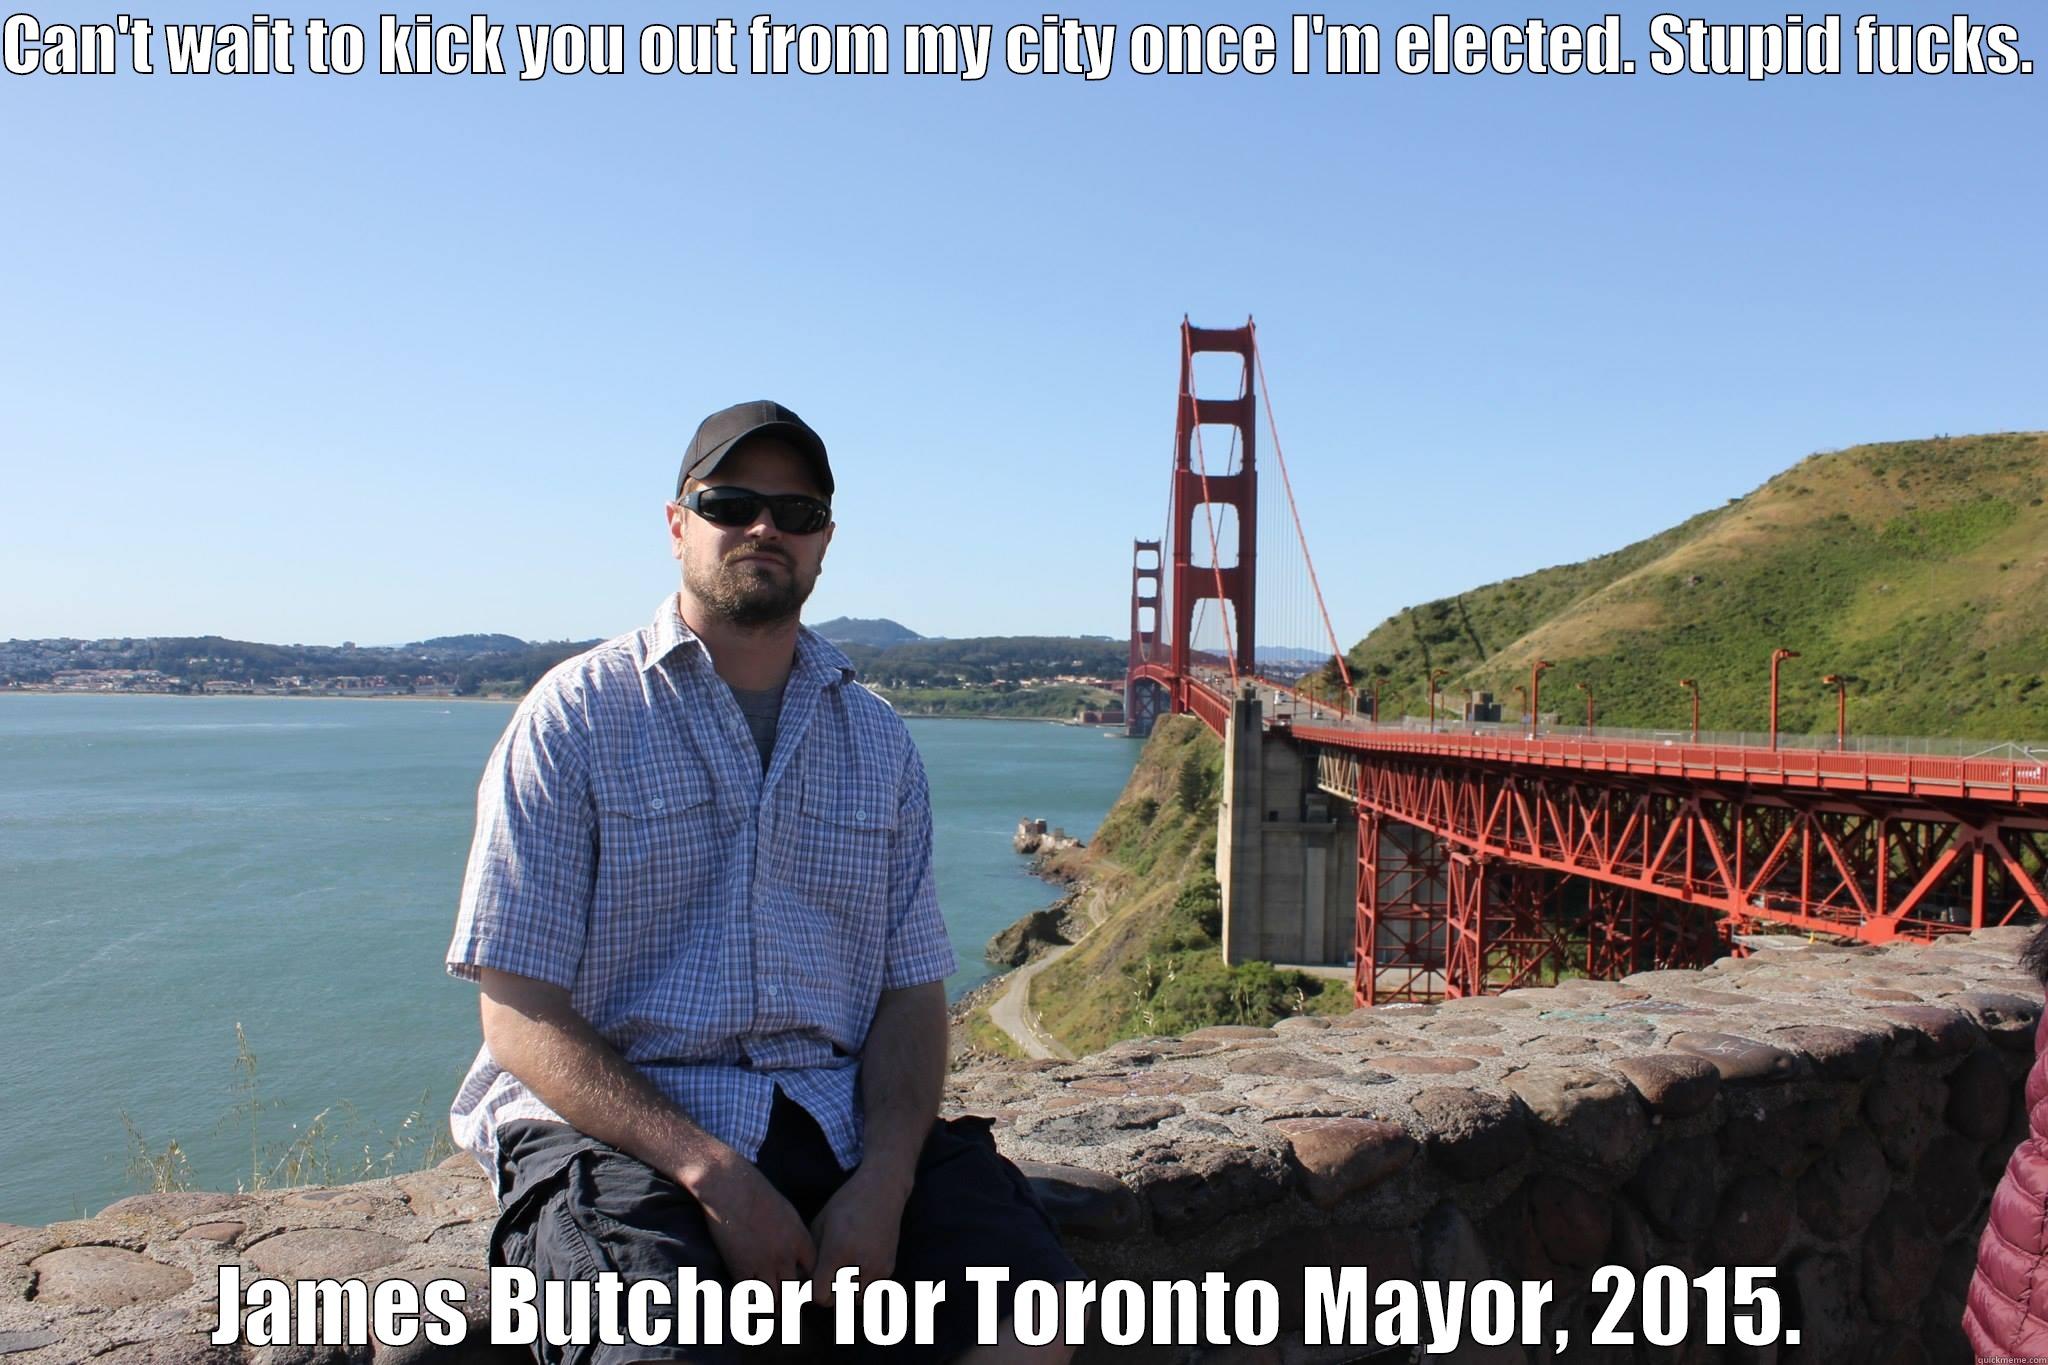 Campaign ad.  - CAN'T WAIT TO KICK YOU OUT FROM MY CITY ONCE I'M ELECTED. STUPID FUCKS.  JAMES BUTCHER FOR TORONTO MAYOR, 2015.  Misc